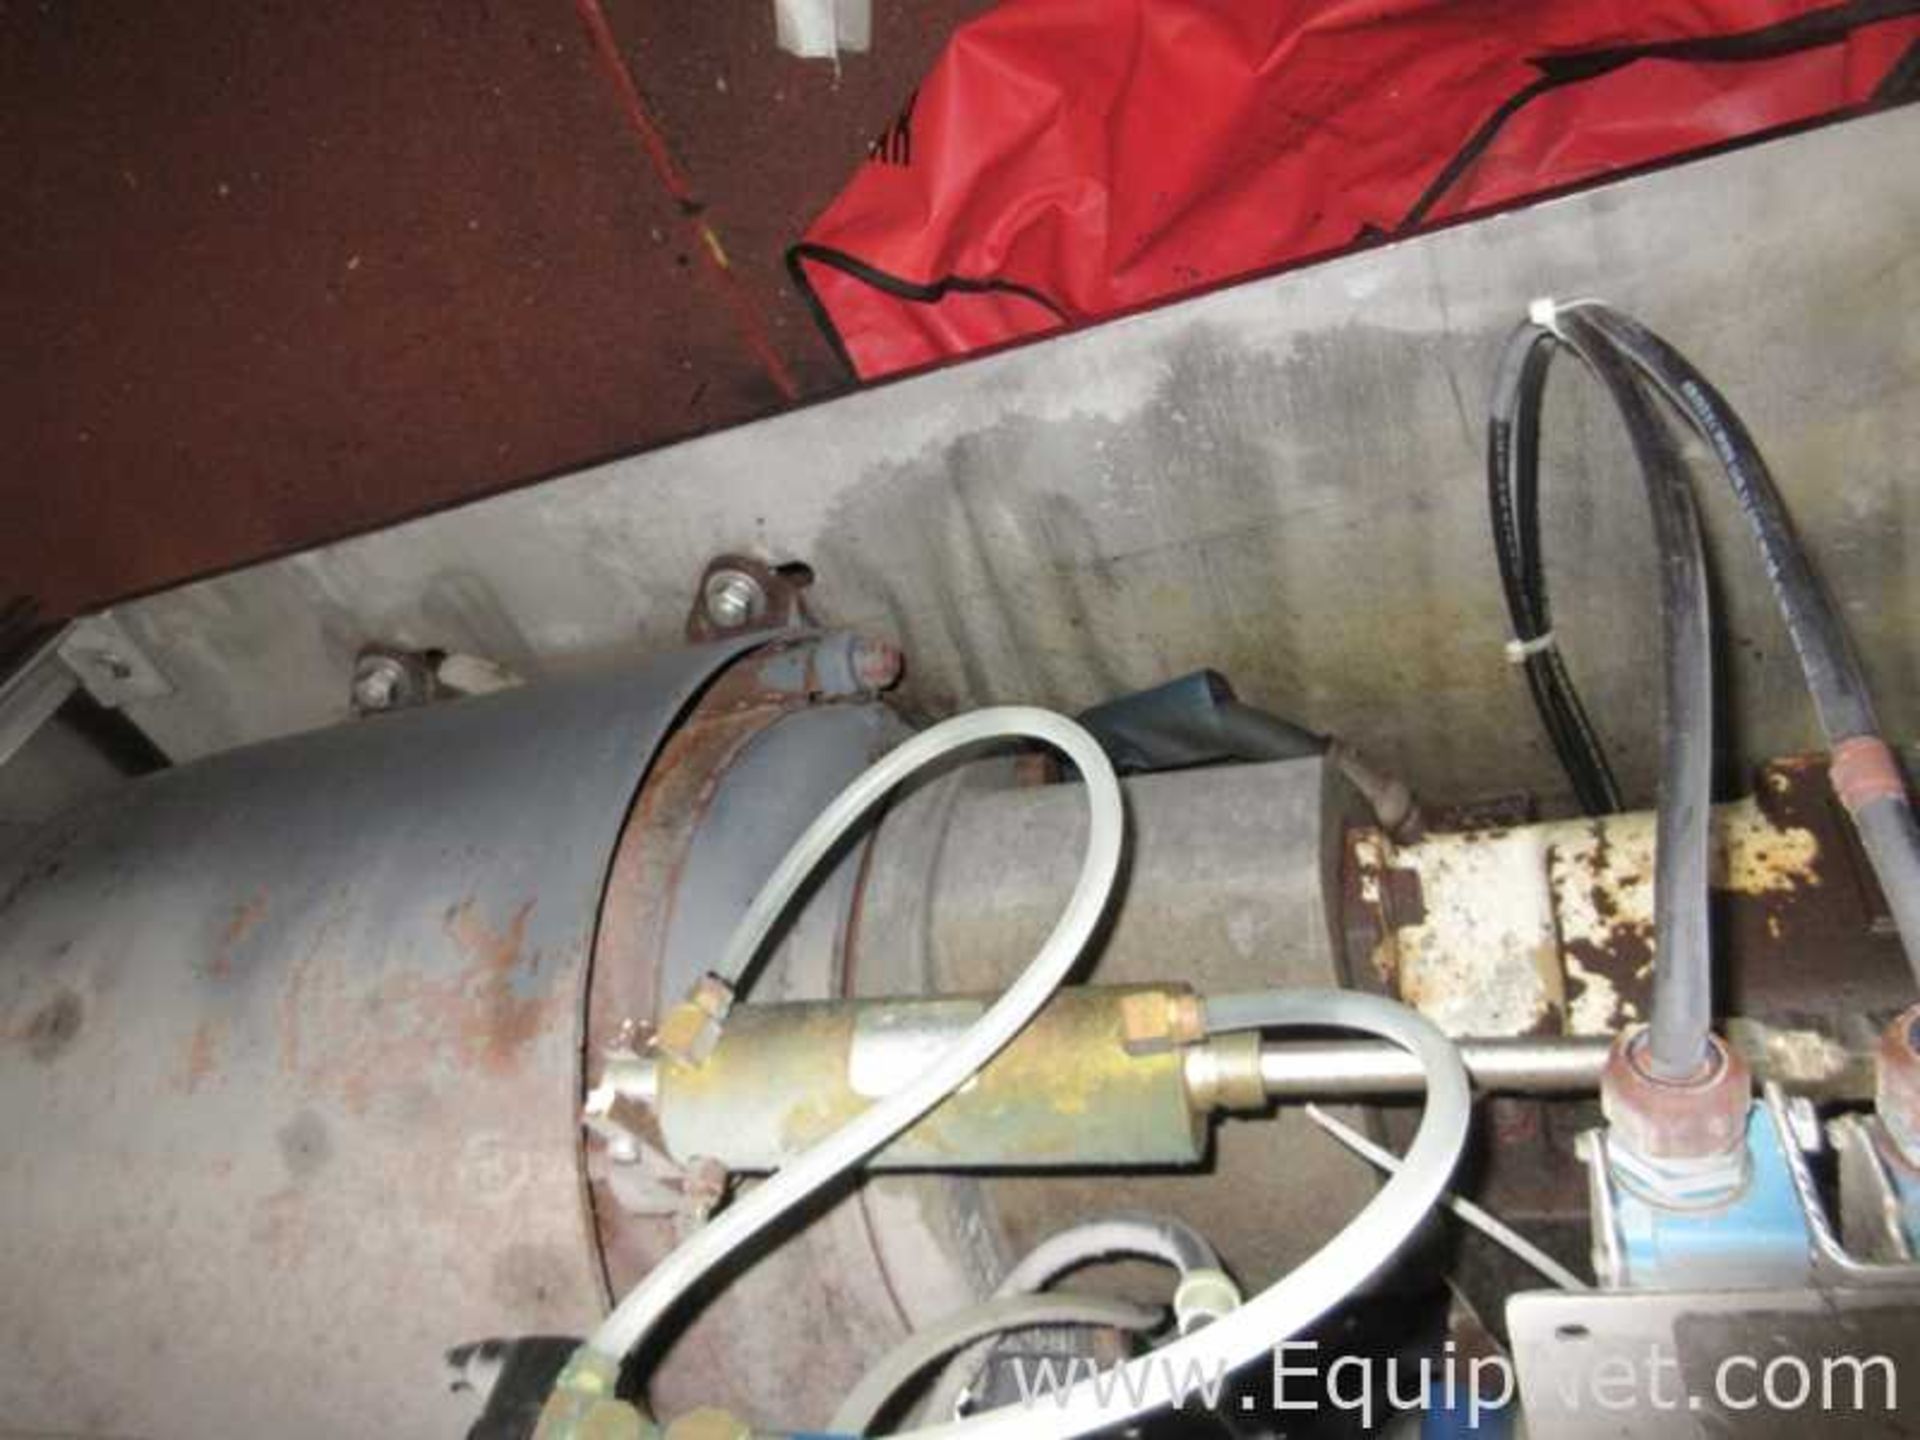 EQUIPNET LISTING #775954; REMOVAL COST: $1,828.00; DESCRIPTION: Approx. 300 Gallon Stainless Steel - Image 9 of 15